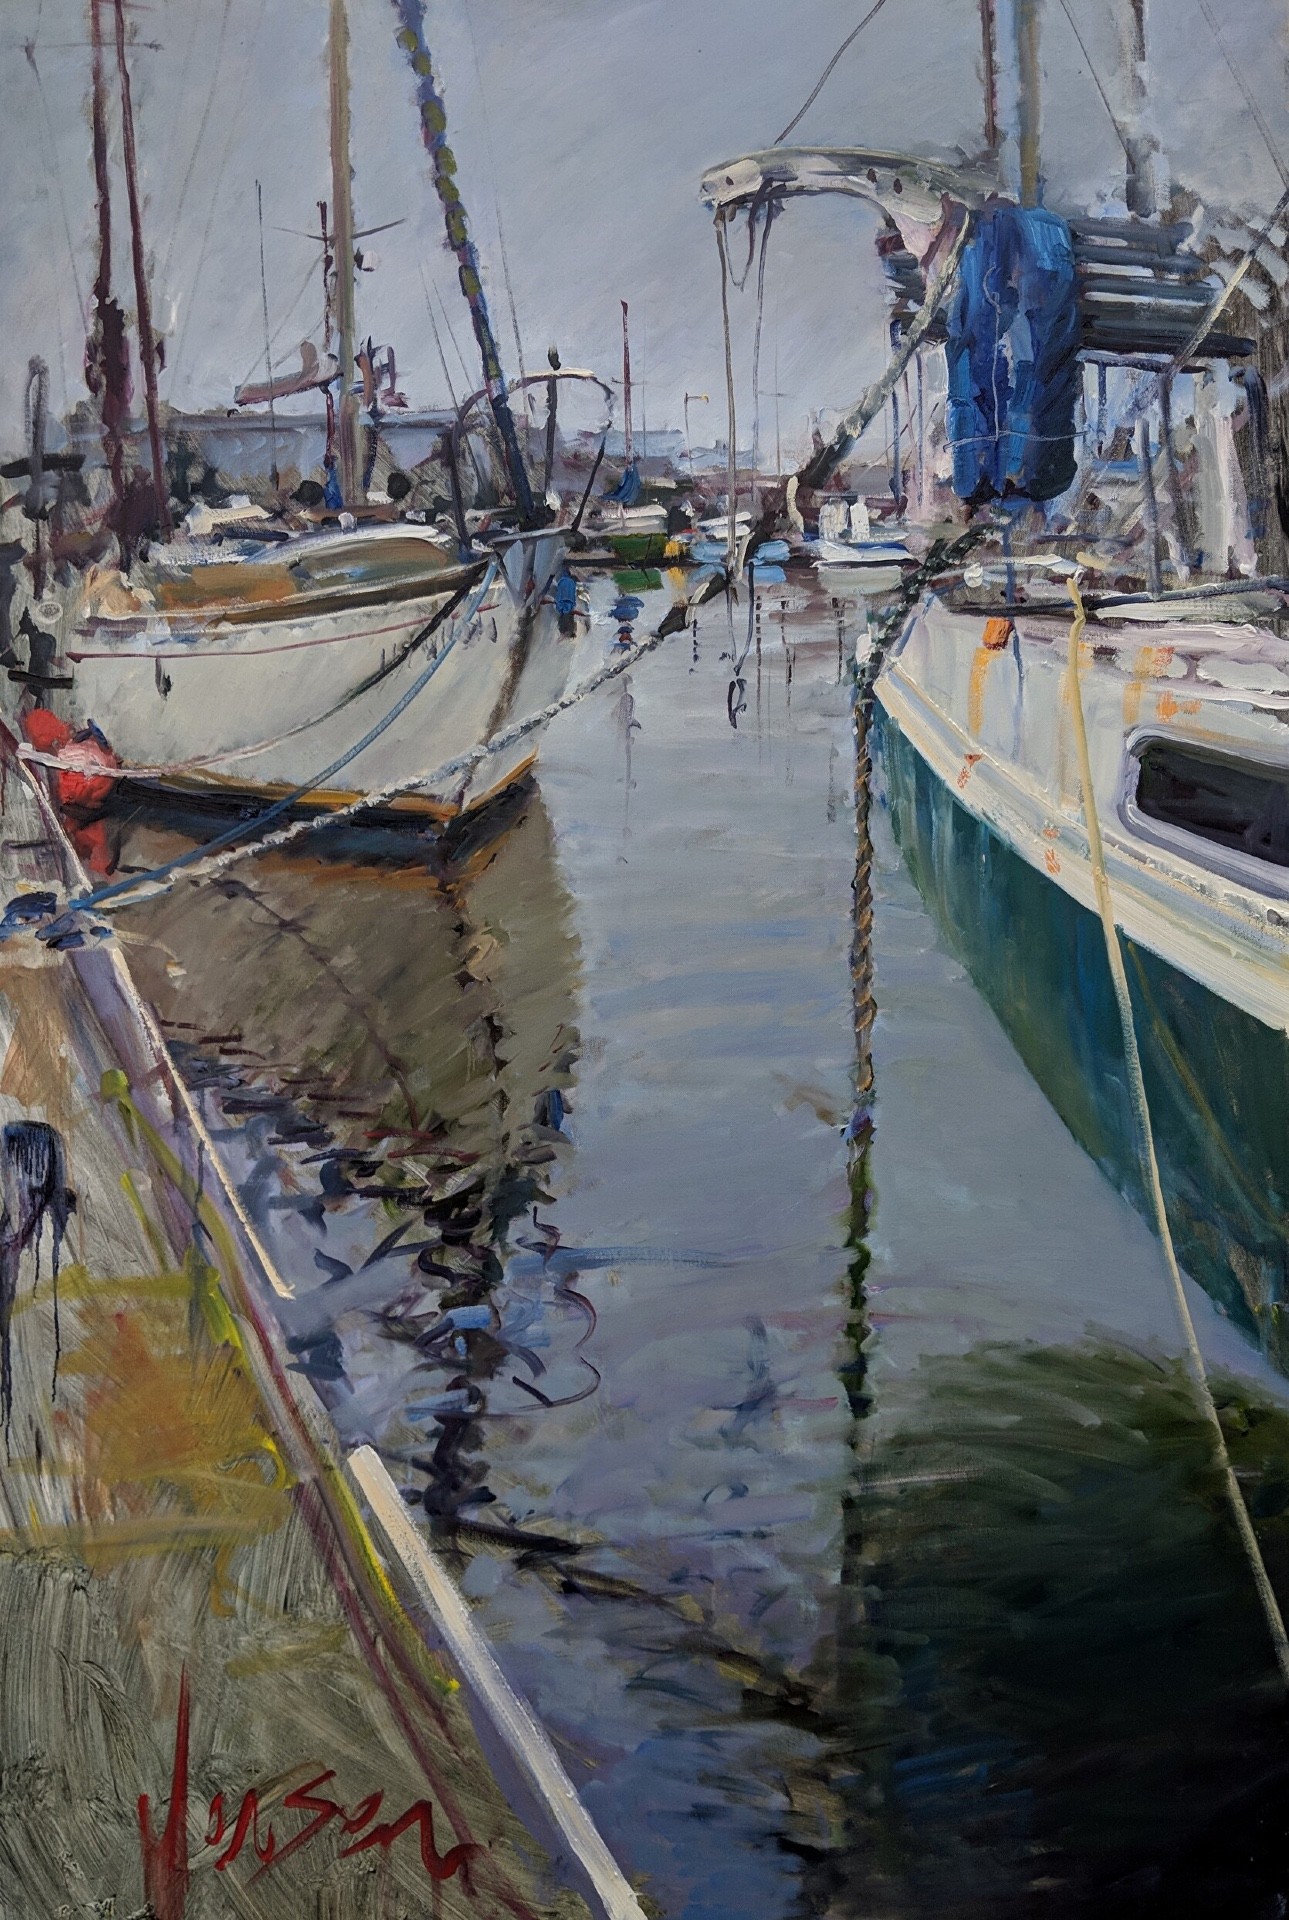 art competition - Ryan Jensen, "The Sound of the Marina," oil, 60 x 40 in.